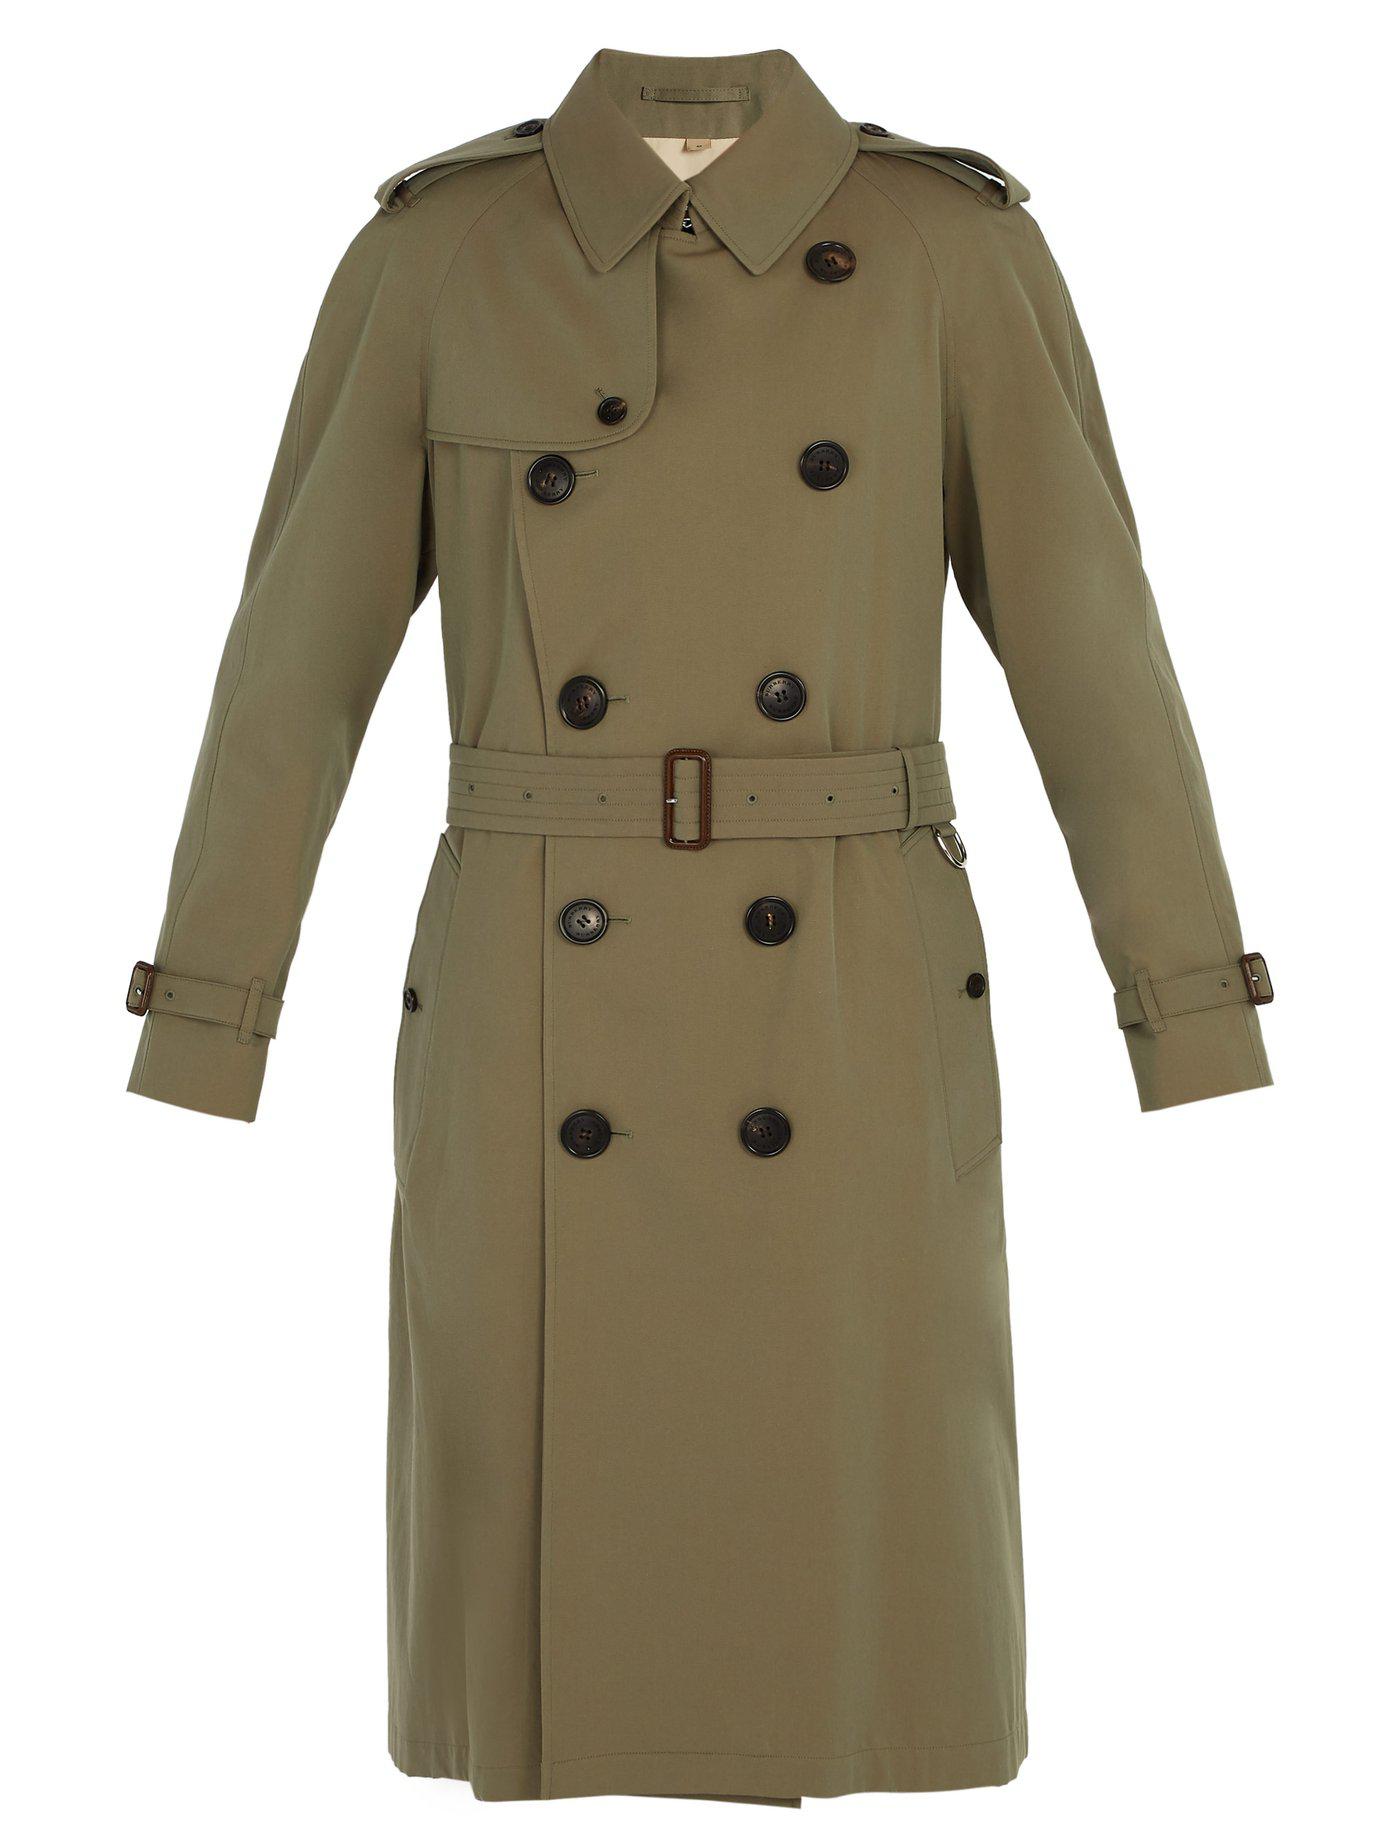 Burberry Cotton Double Breasted Trench Coat in Green for Men - Lyst